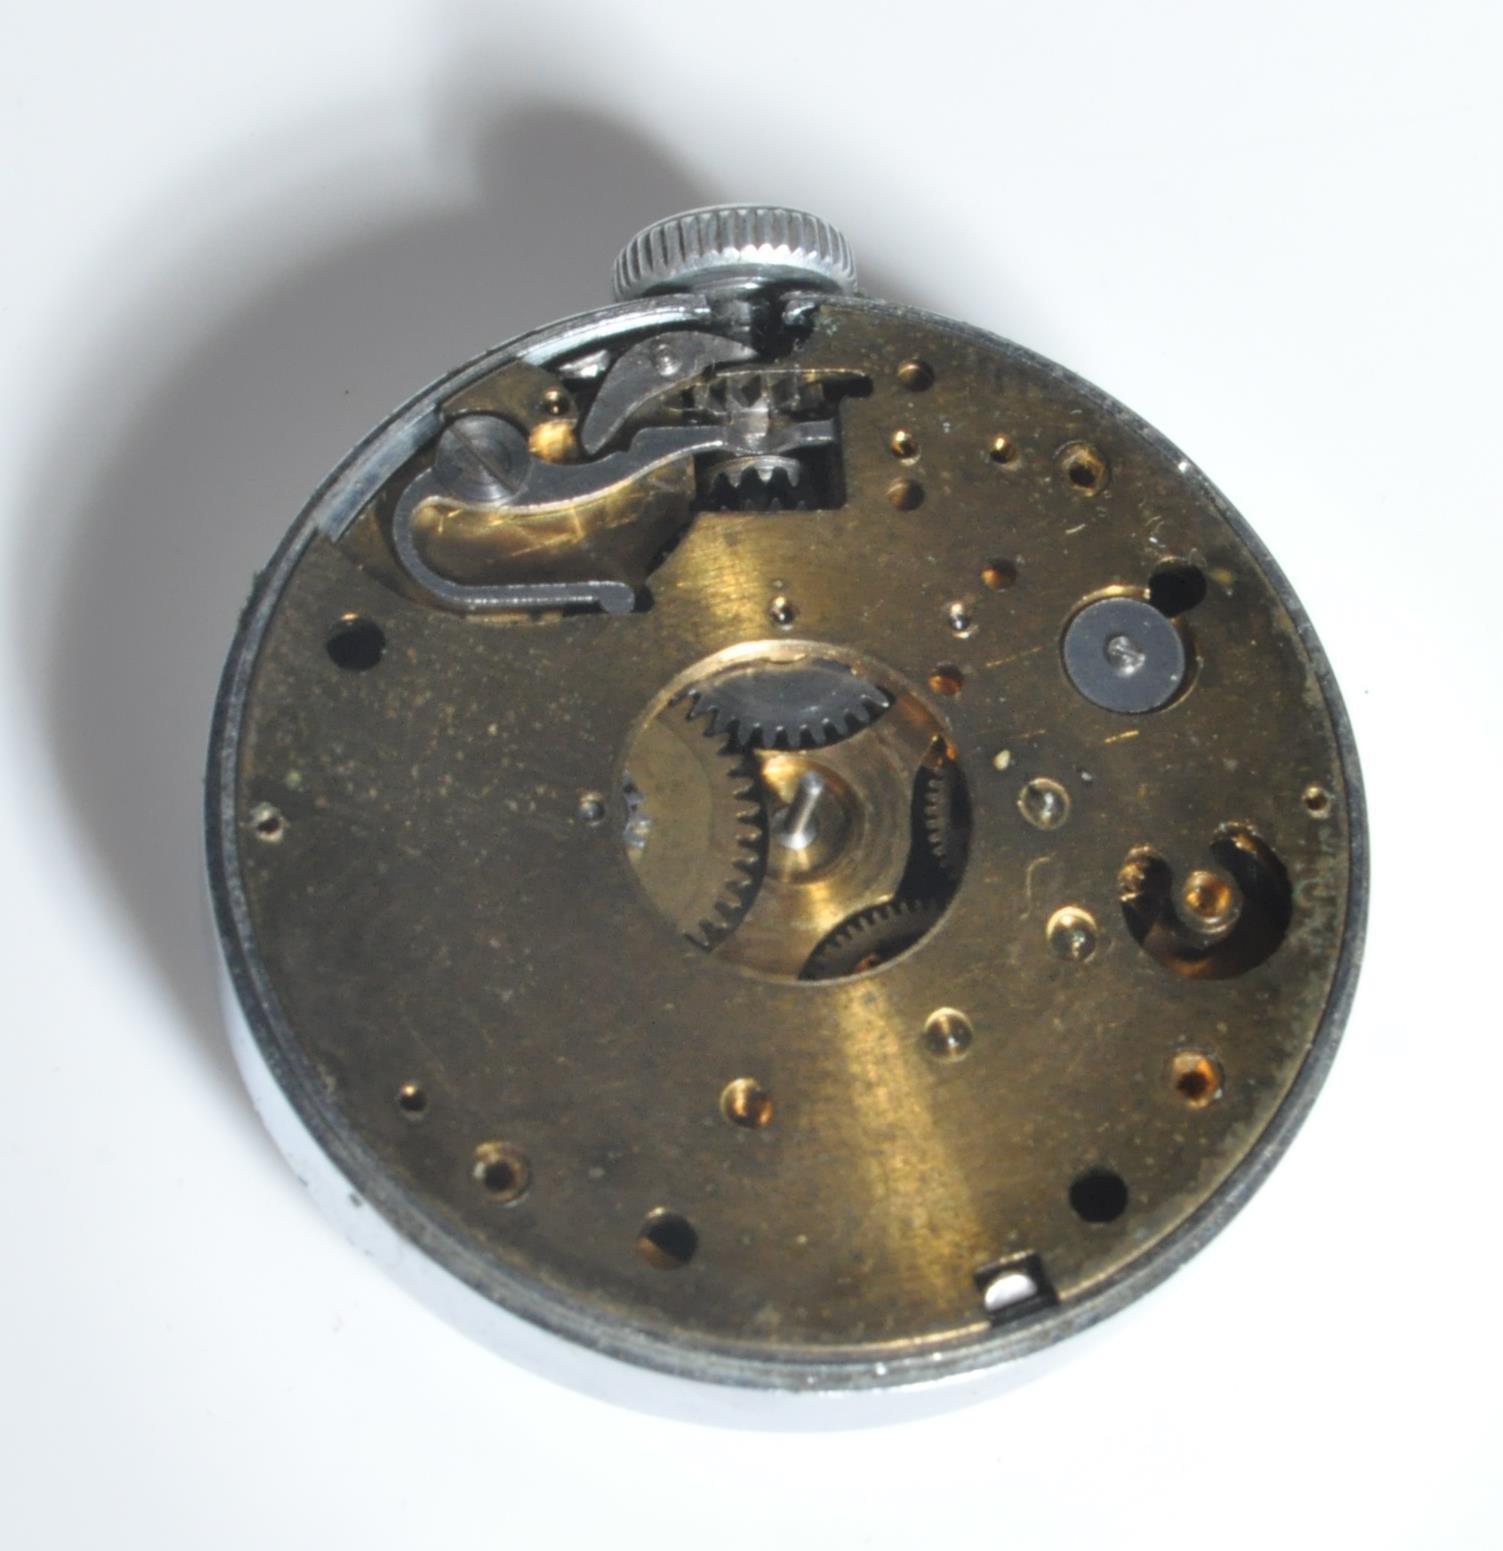 MID 20TH CENTURY SERVICES COLONIAL GENTLEMEN'S WRISTWATCH - Image 8 of 11